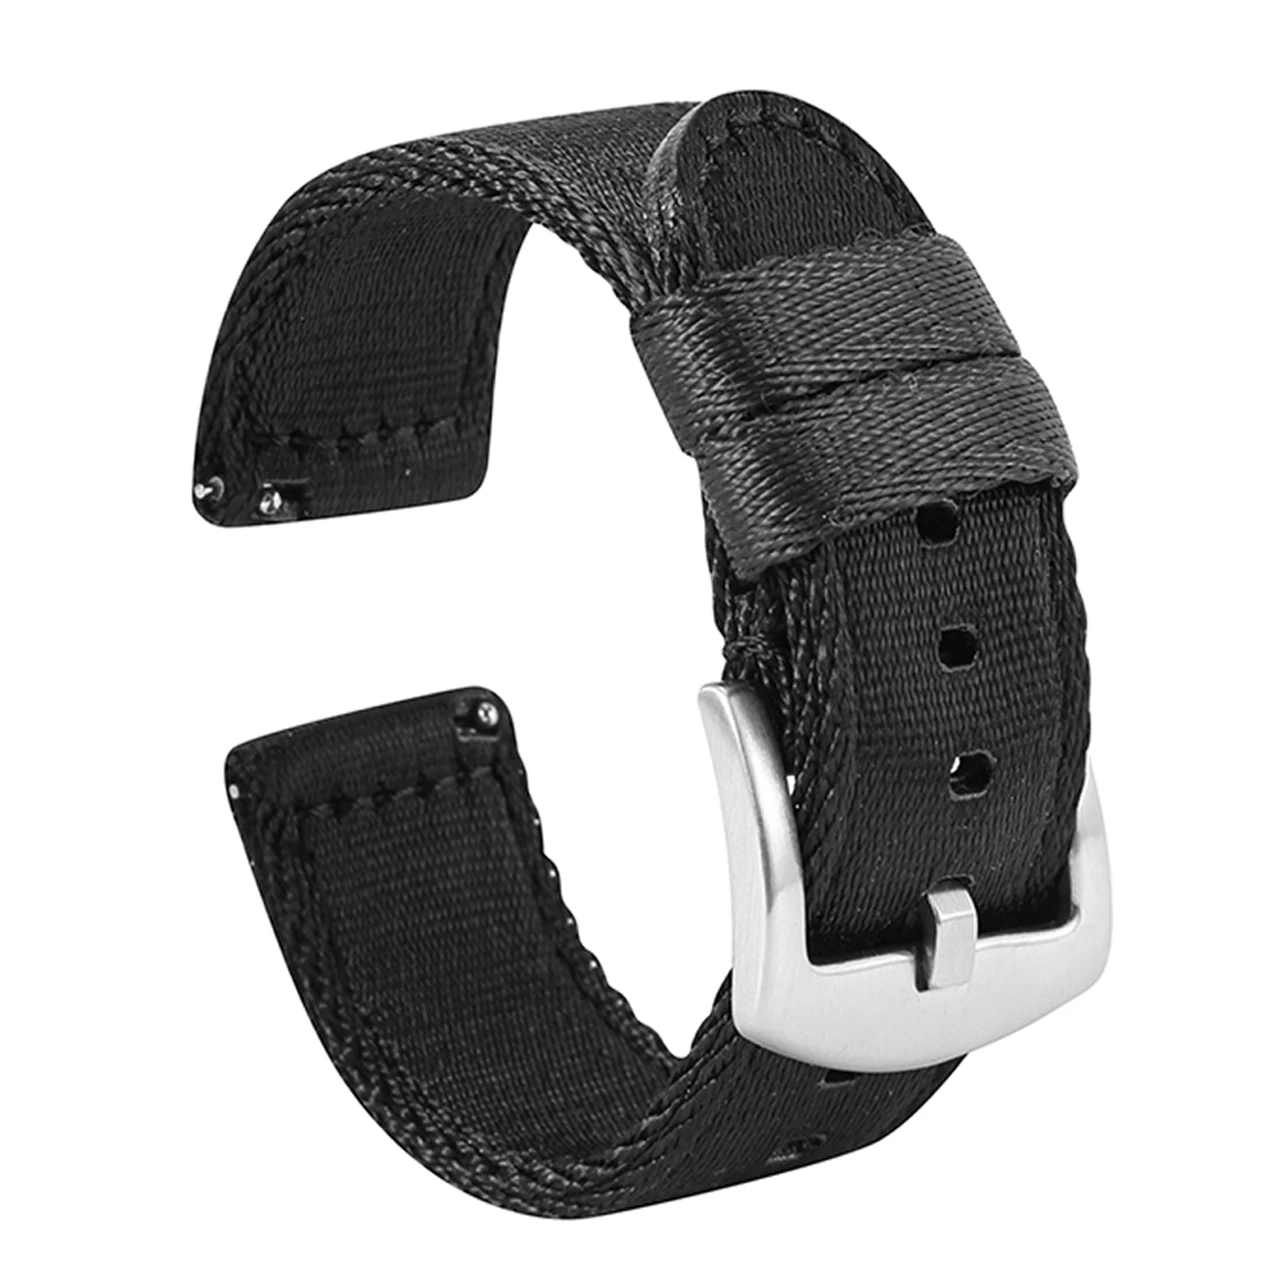 Premium Nylon Watchband Quick Release Watch Strap 20mm 22mm Seatbelt Nylon Military Striped Replacement Watch Accessories